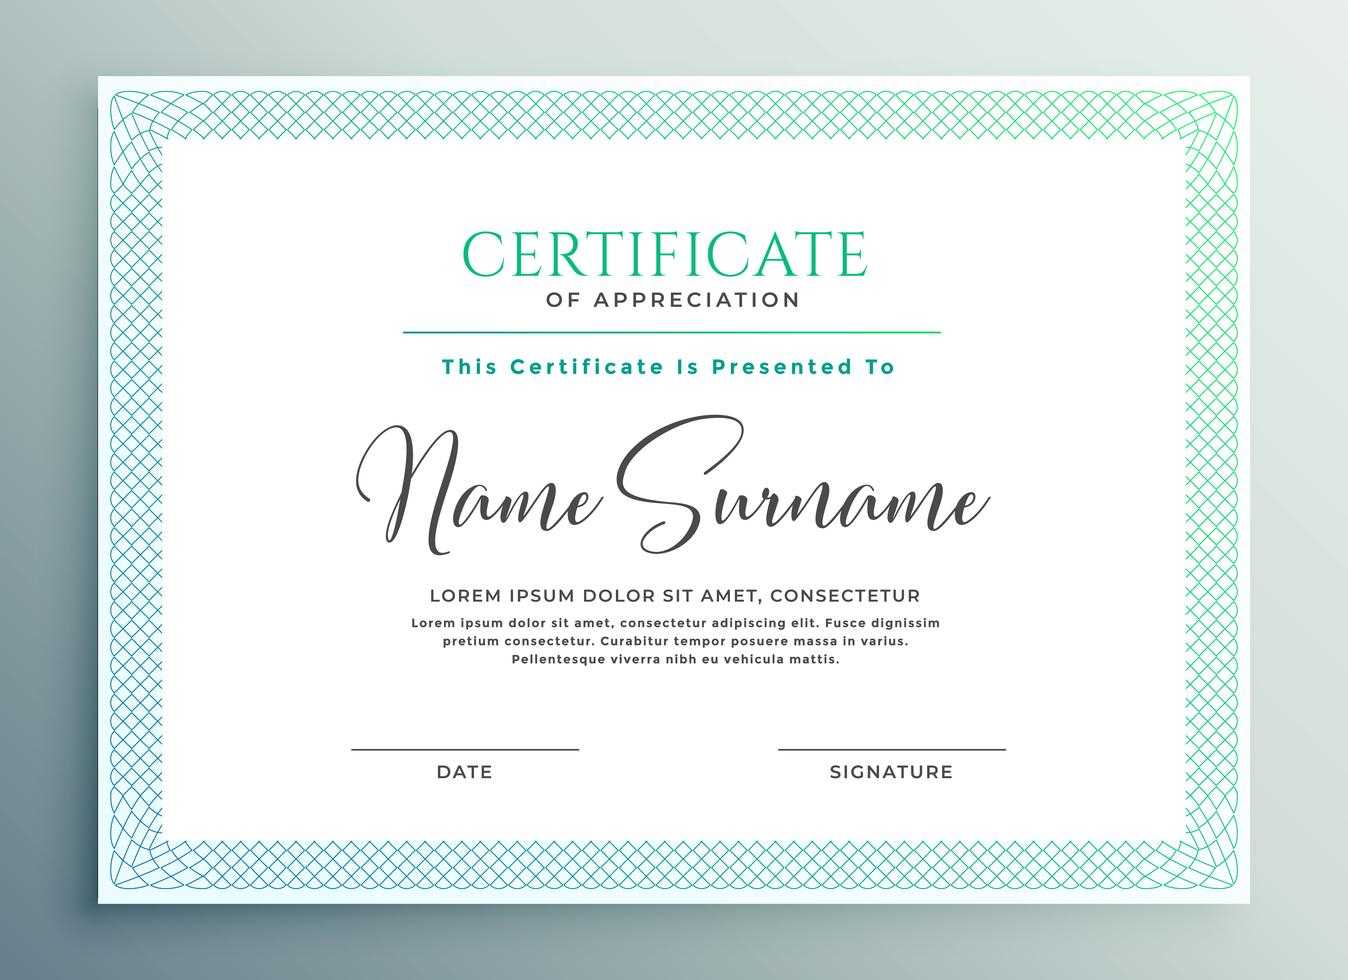 042 General Coa Free Silent Auction Certificate Template For Running Certificates Templates Free